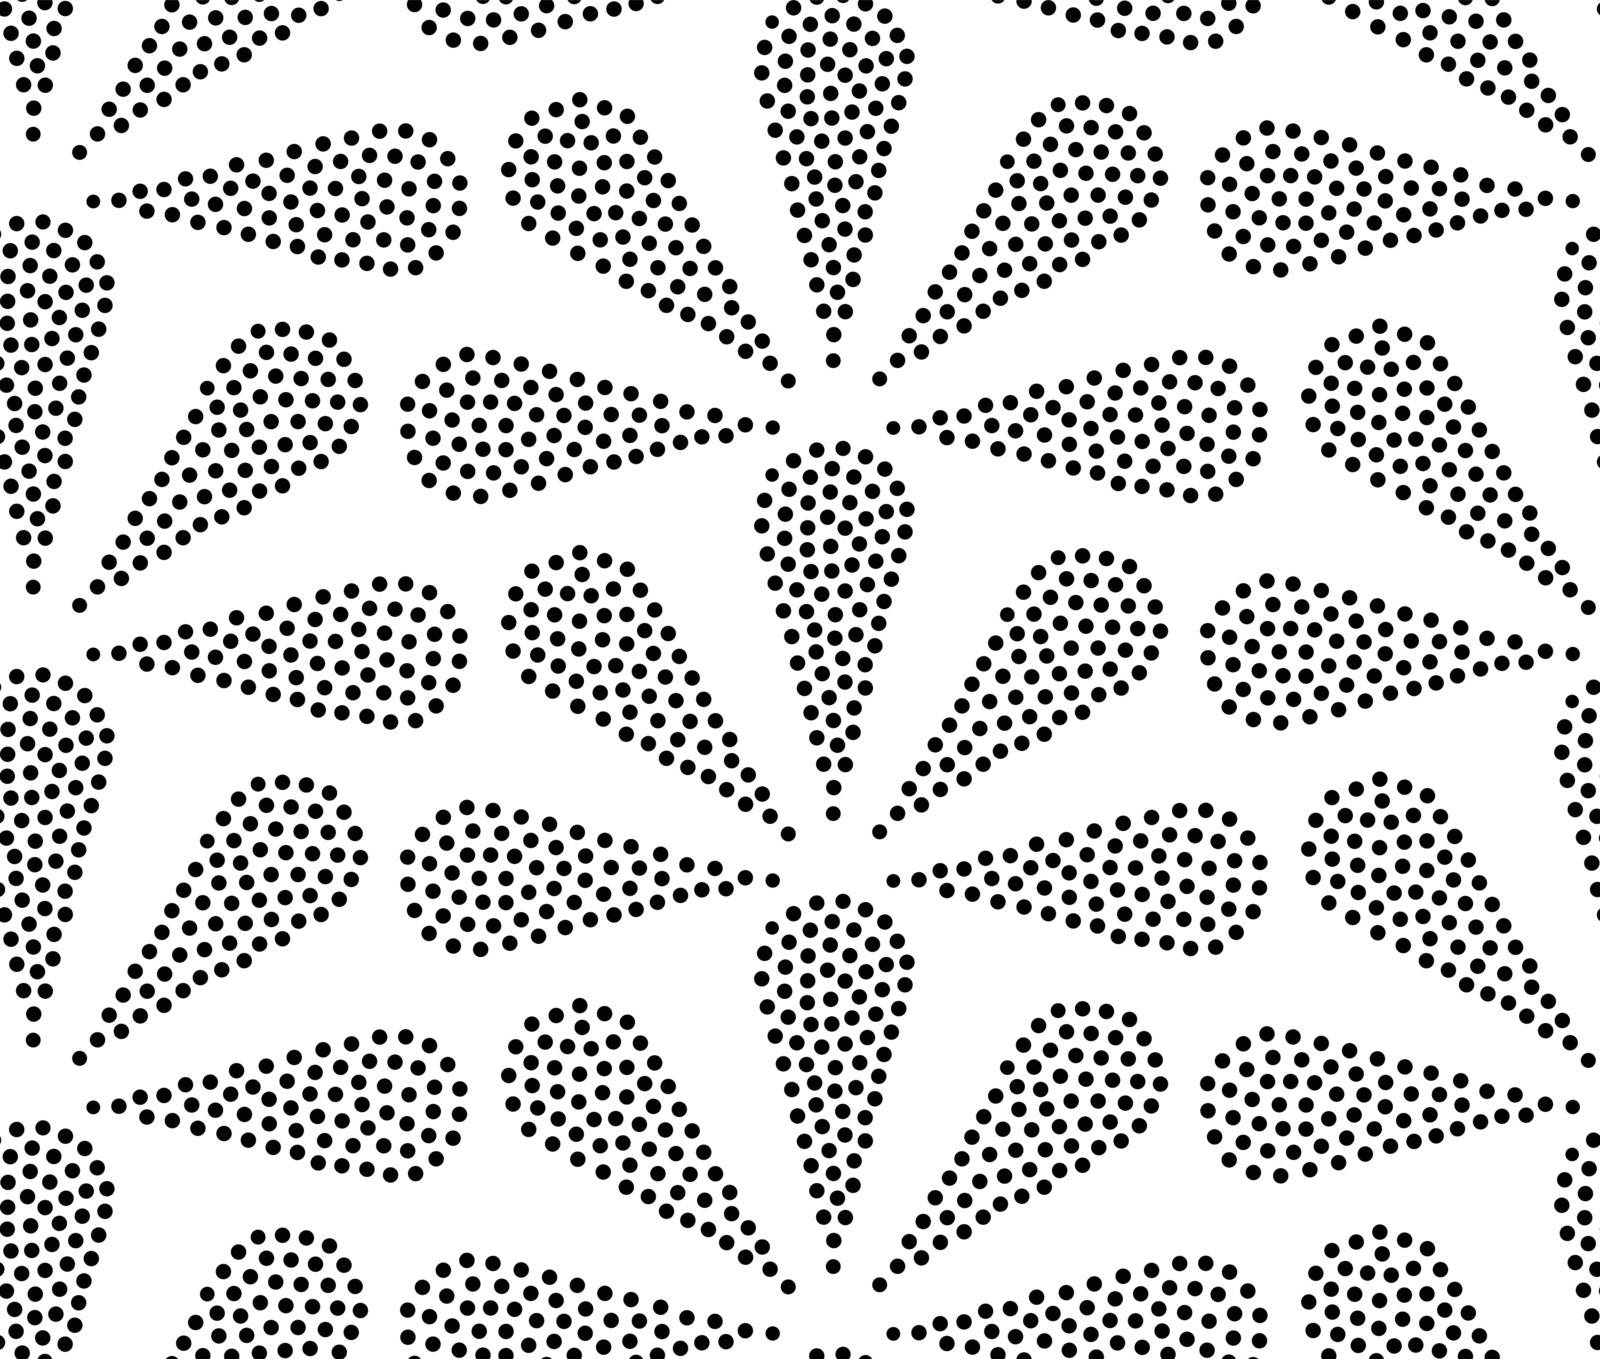 classic seamless pattern by Vanzyst